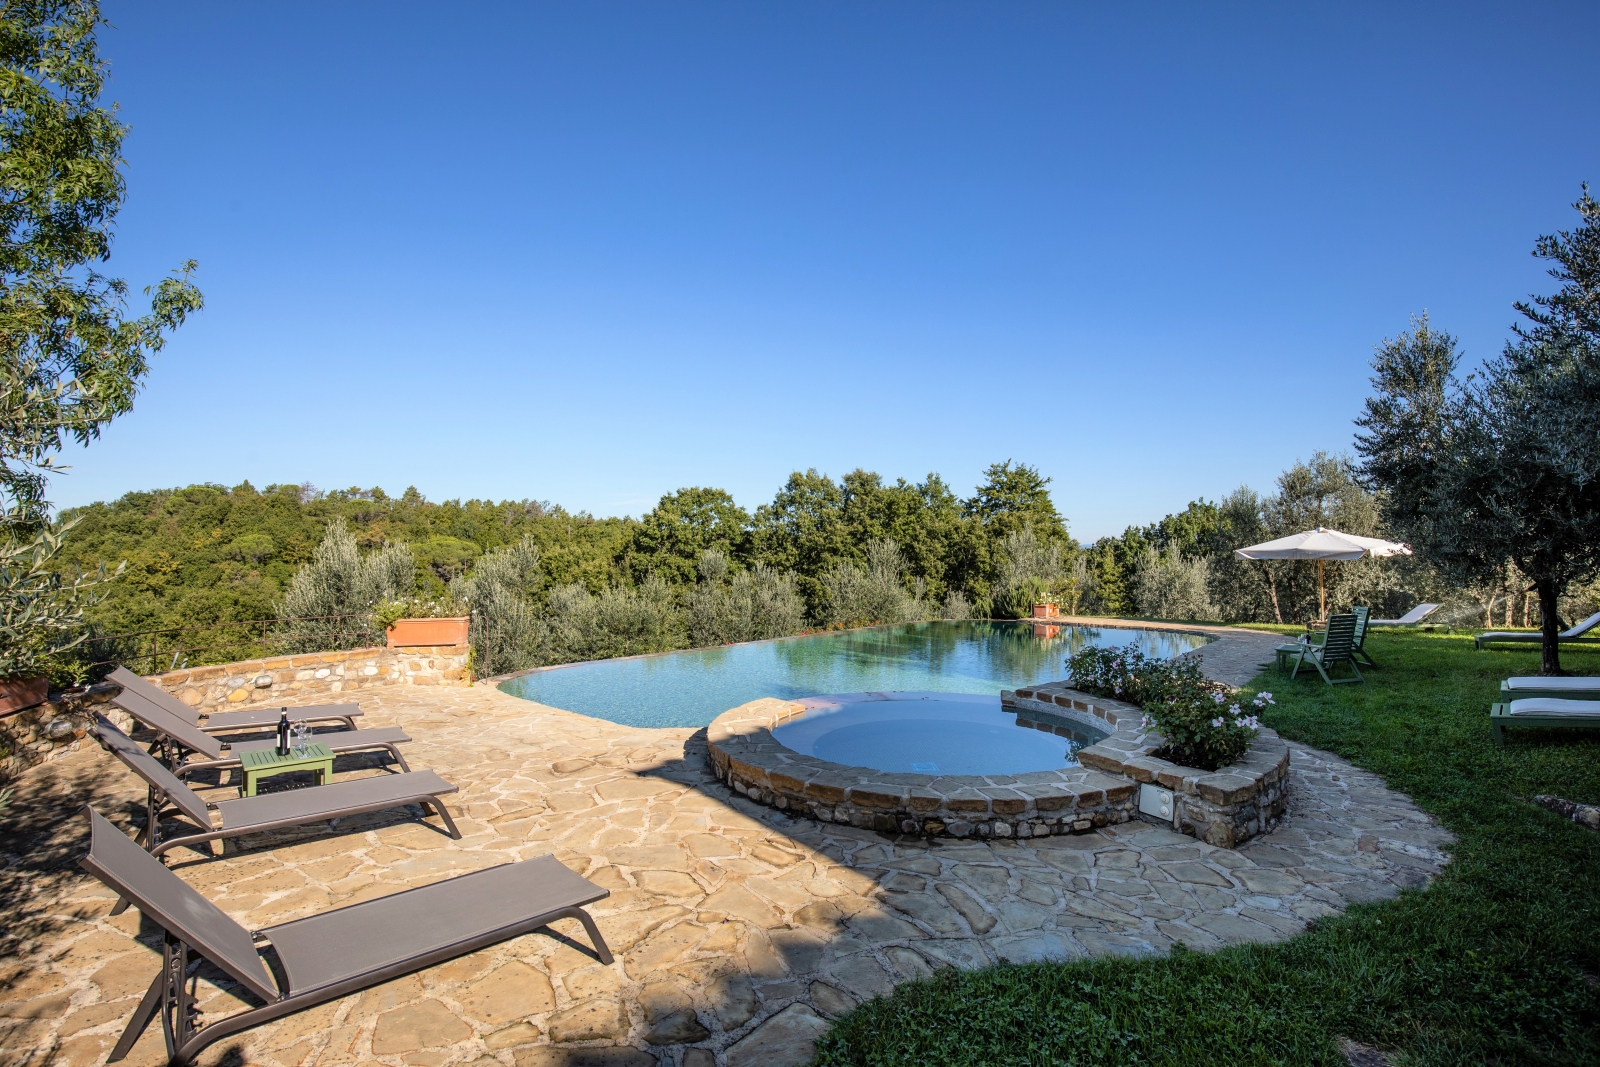 Patio next to pool with sun loungers, table, wine, umbrella and countryside view at Villa Giuliana in Tuscany, Italy